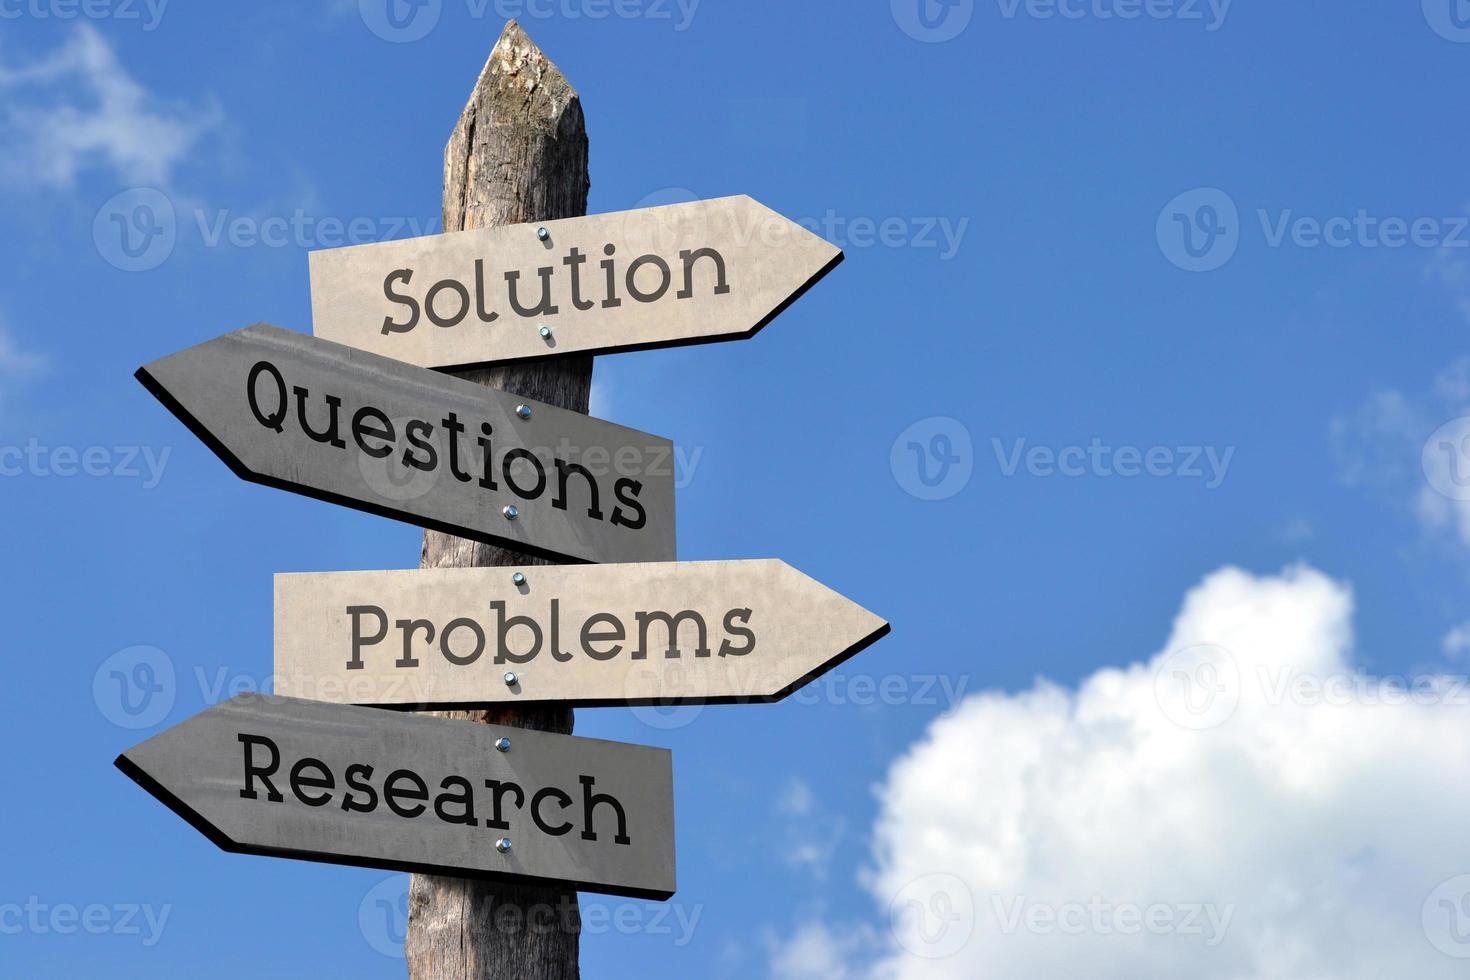 Solution, Questions, Problems, Research - Wooden Signpost with Four Arrows, Sky with Clouds photo